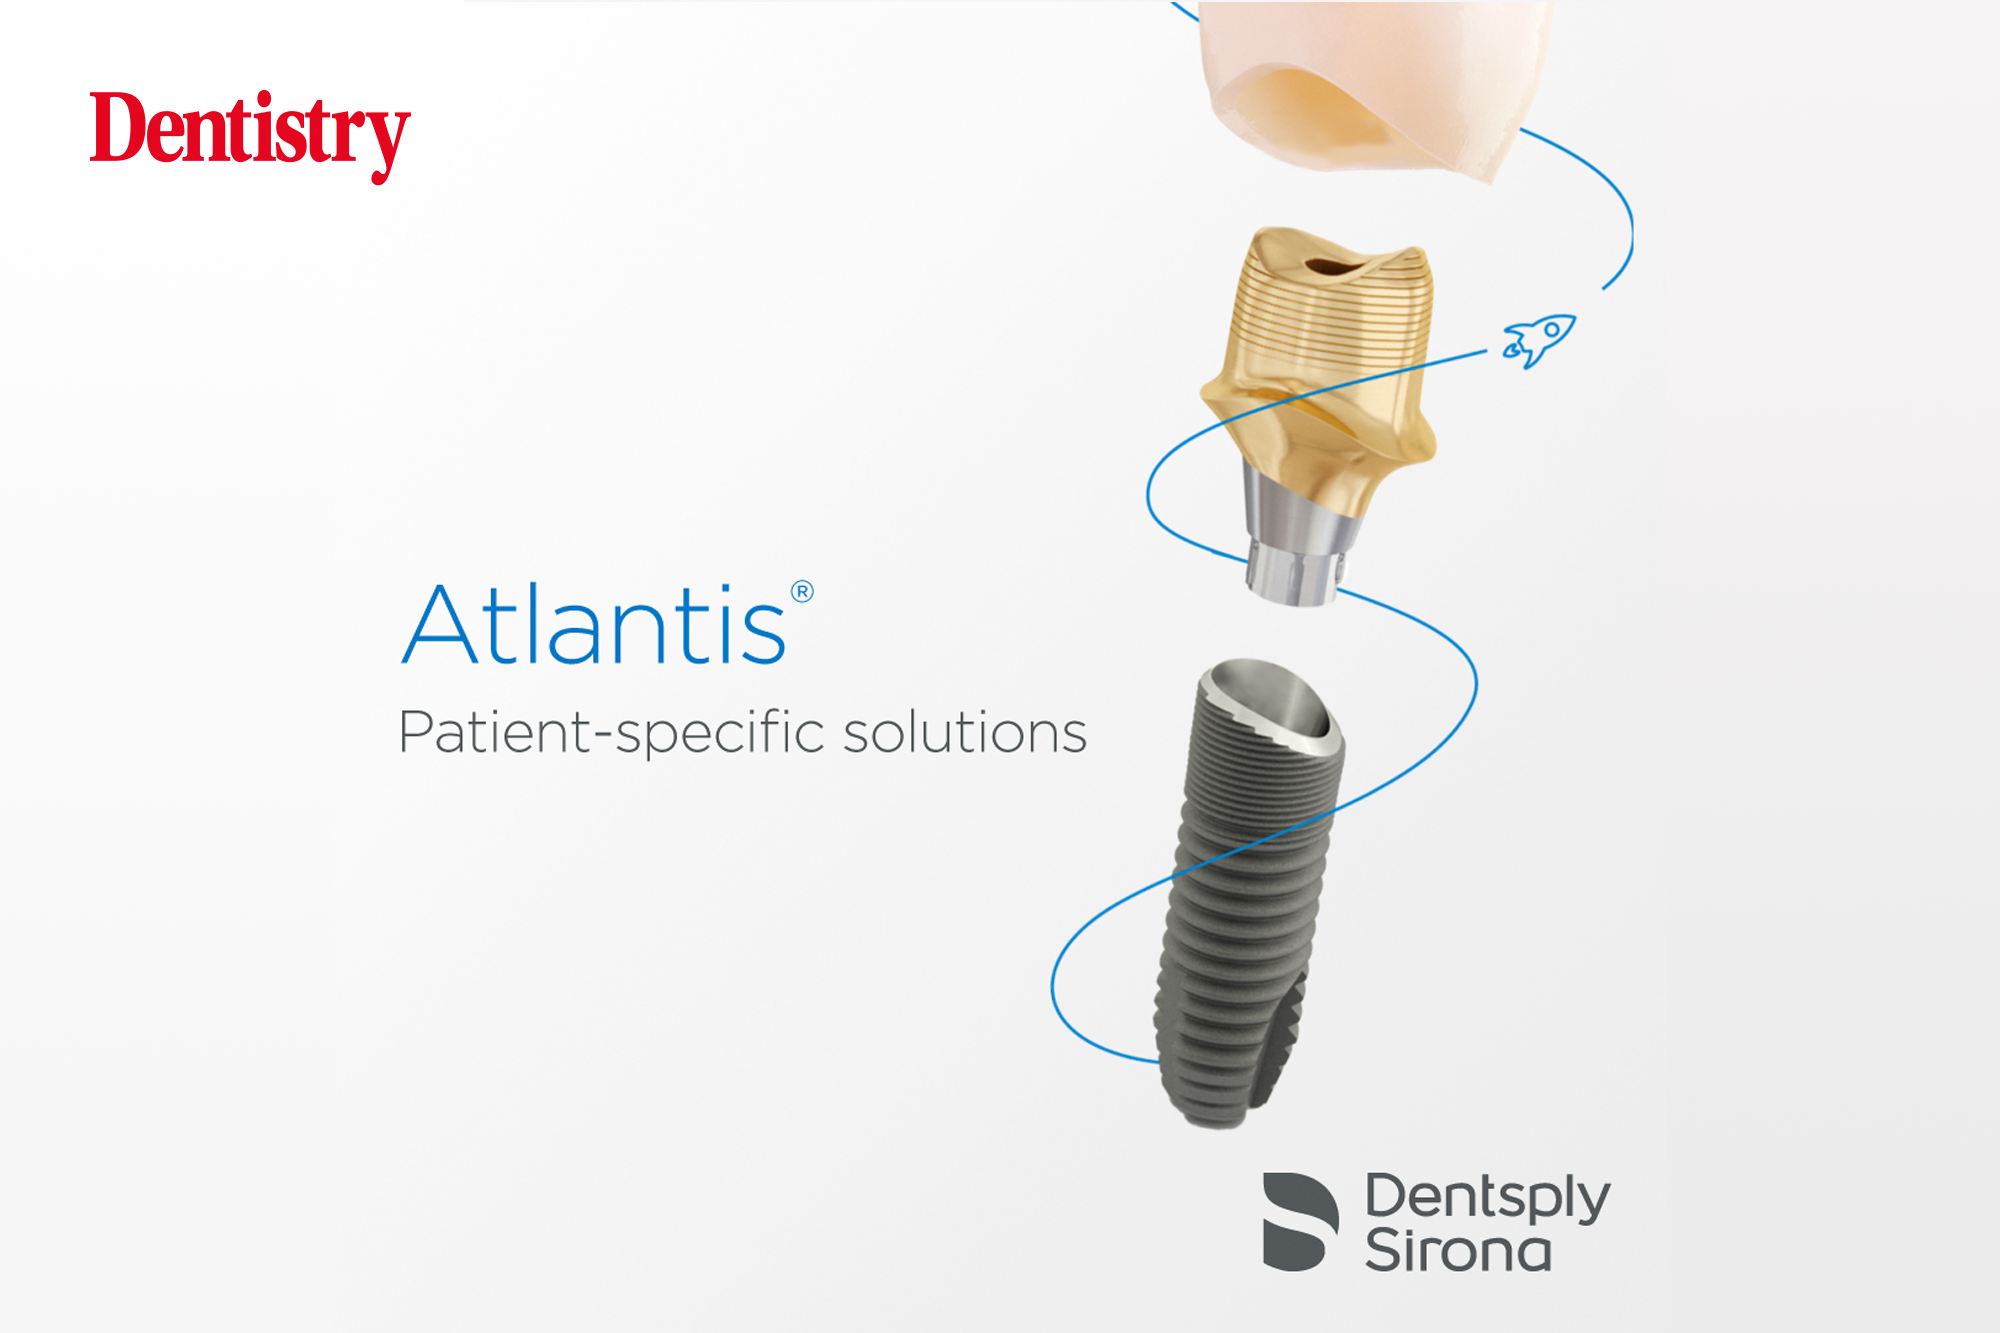 Atlantis: the ideal foundation for every implant prosthesis - Dentistry